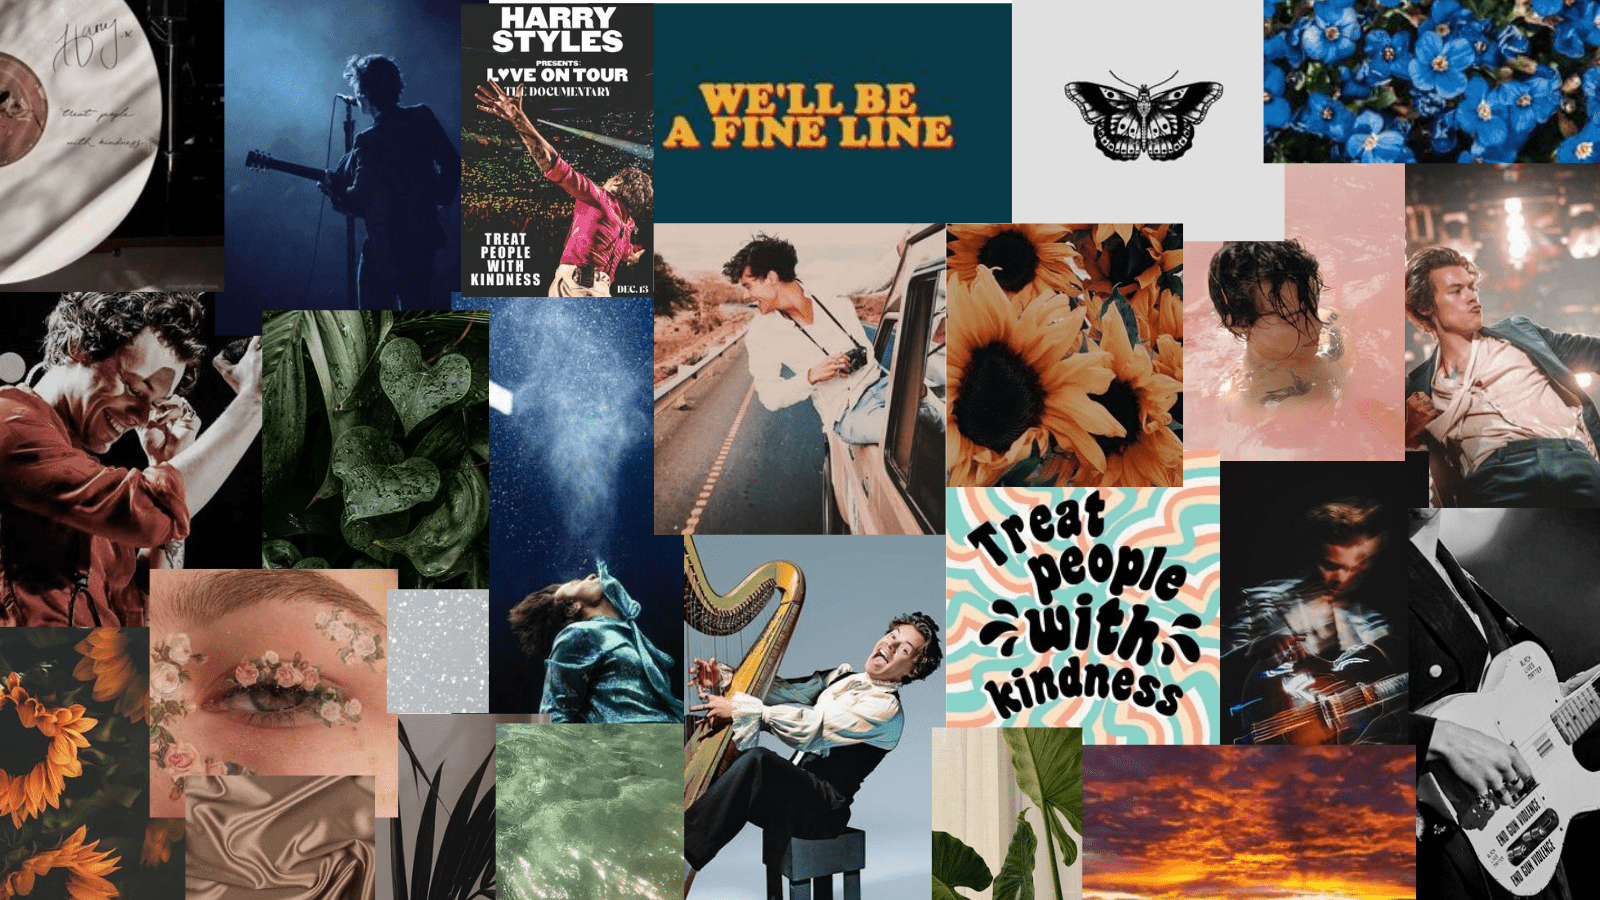 A collage of Harry Styles' music covers and images. - Harry Styles